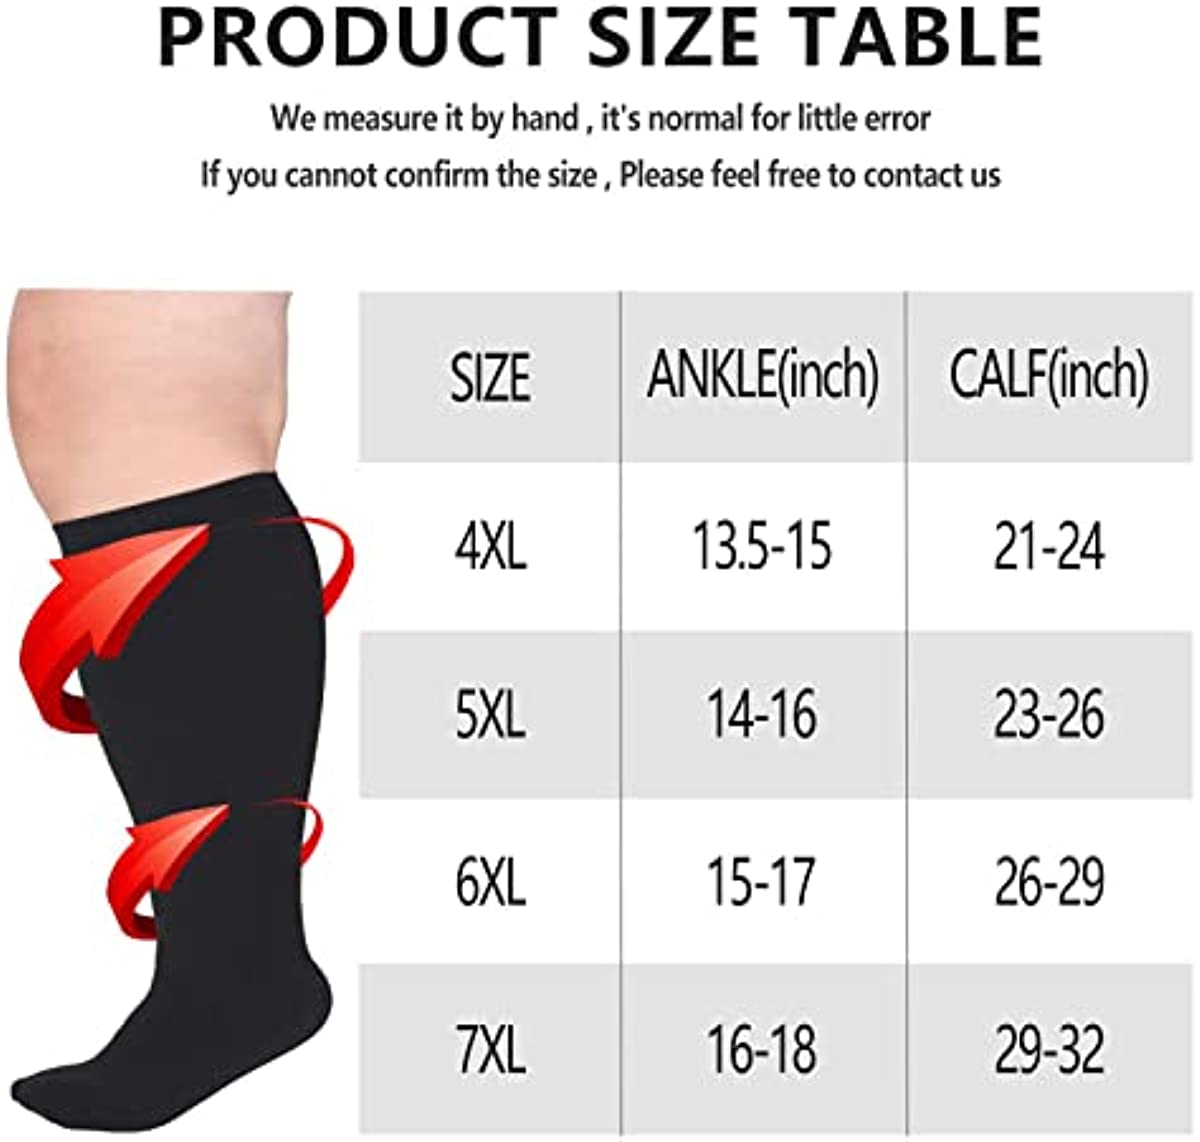 Plus Size Compression Socks Wide Calf Compression Socks for Women Men 20-30 mmHg Support Extra Large Knee High Stockings 6XL